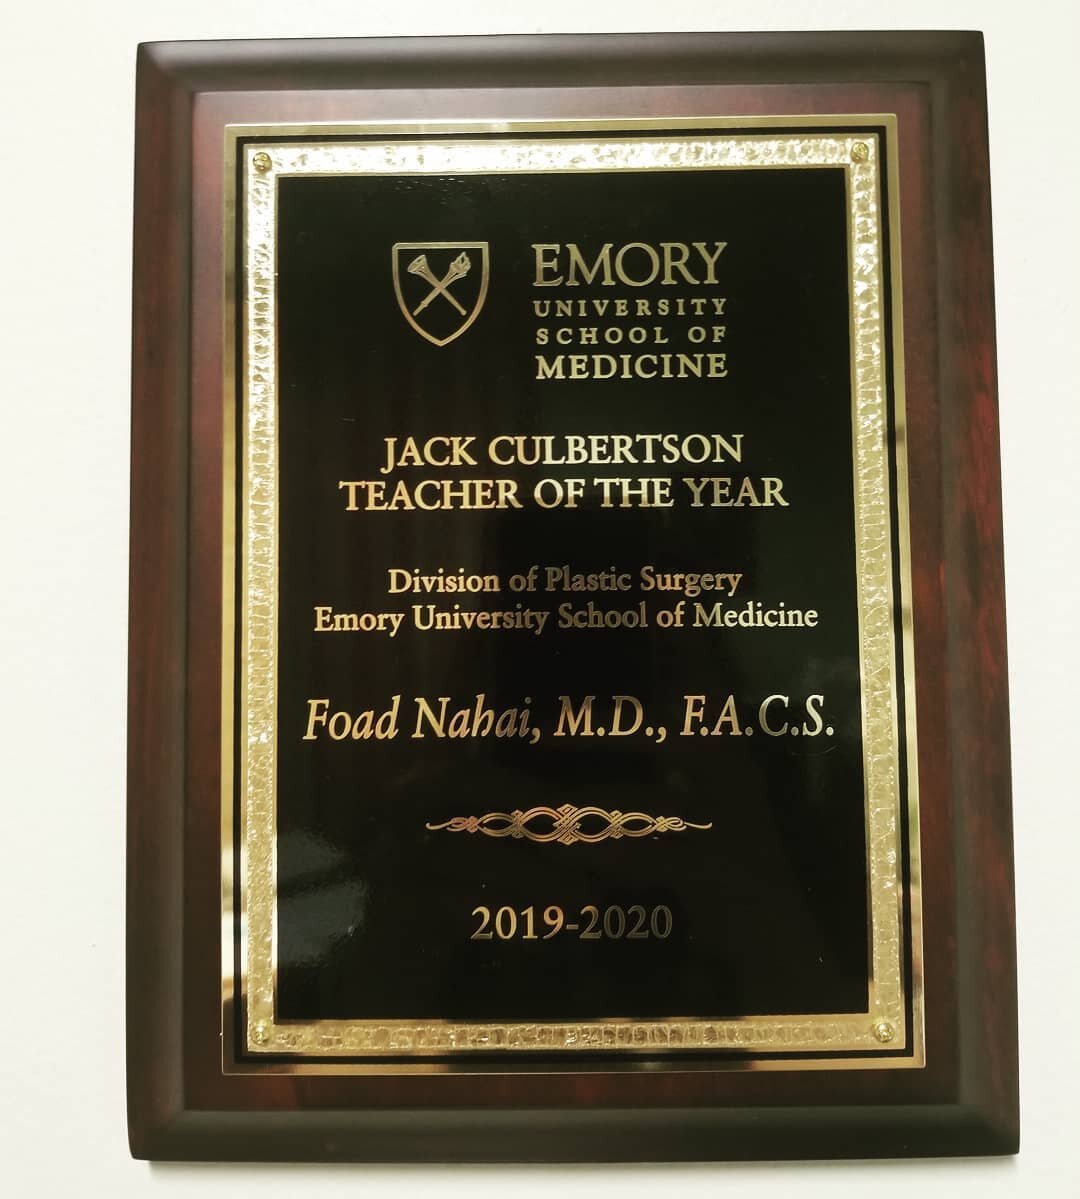 Thank you to Dr. Alexandra Hart and Dr. Victor Chien, our graduating residents, for this fabulous award. I wish you every success in the future. The plastic surgery world is fortunate to have  you both! @alexandrahart0